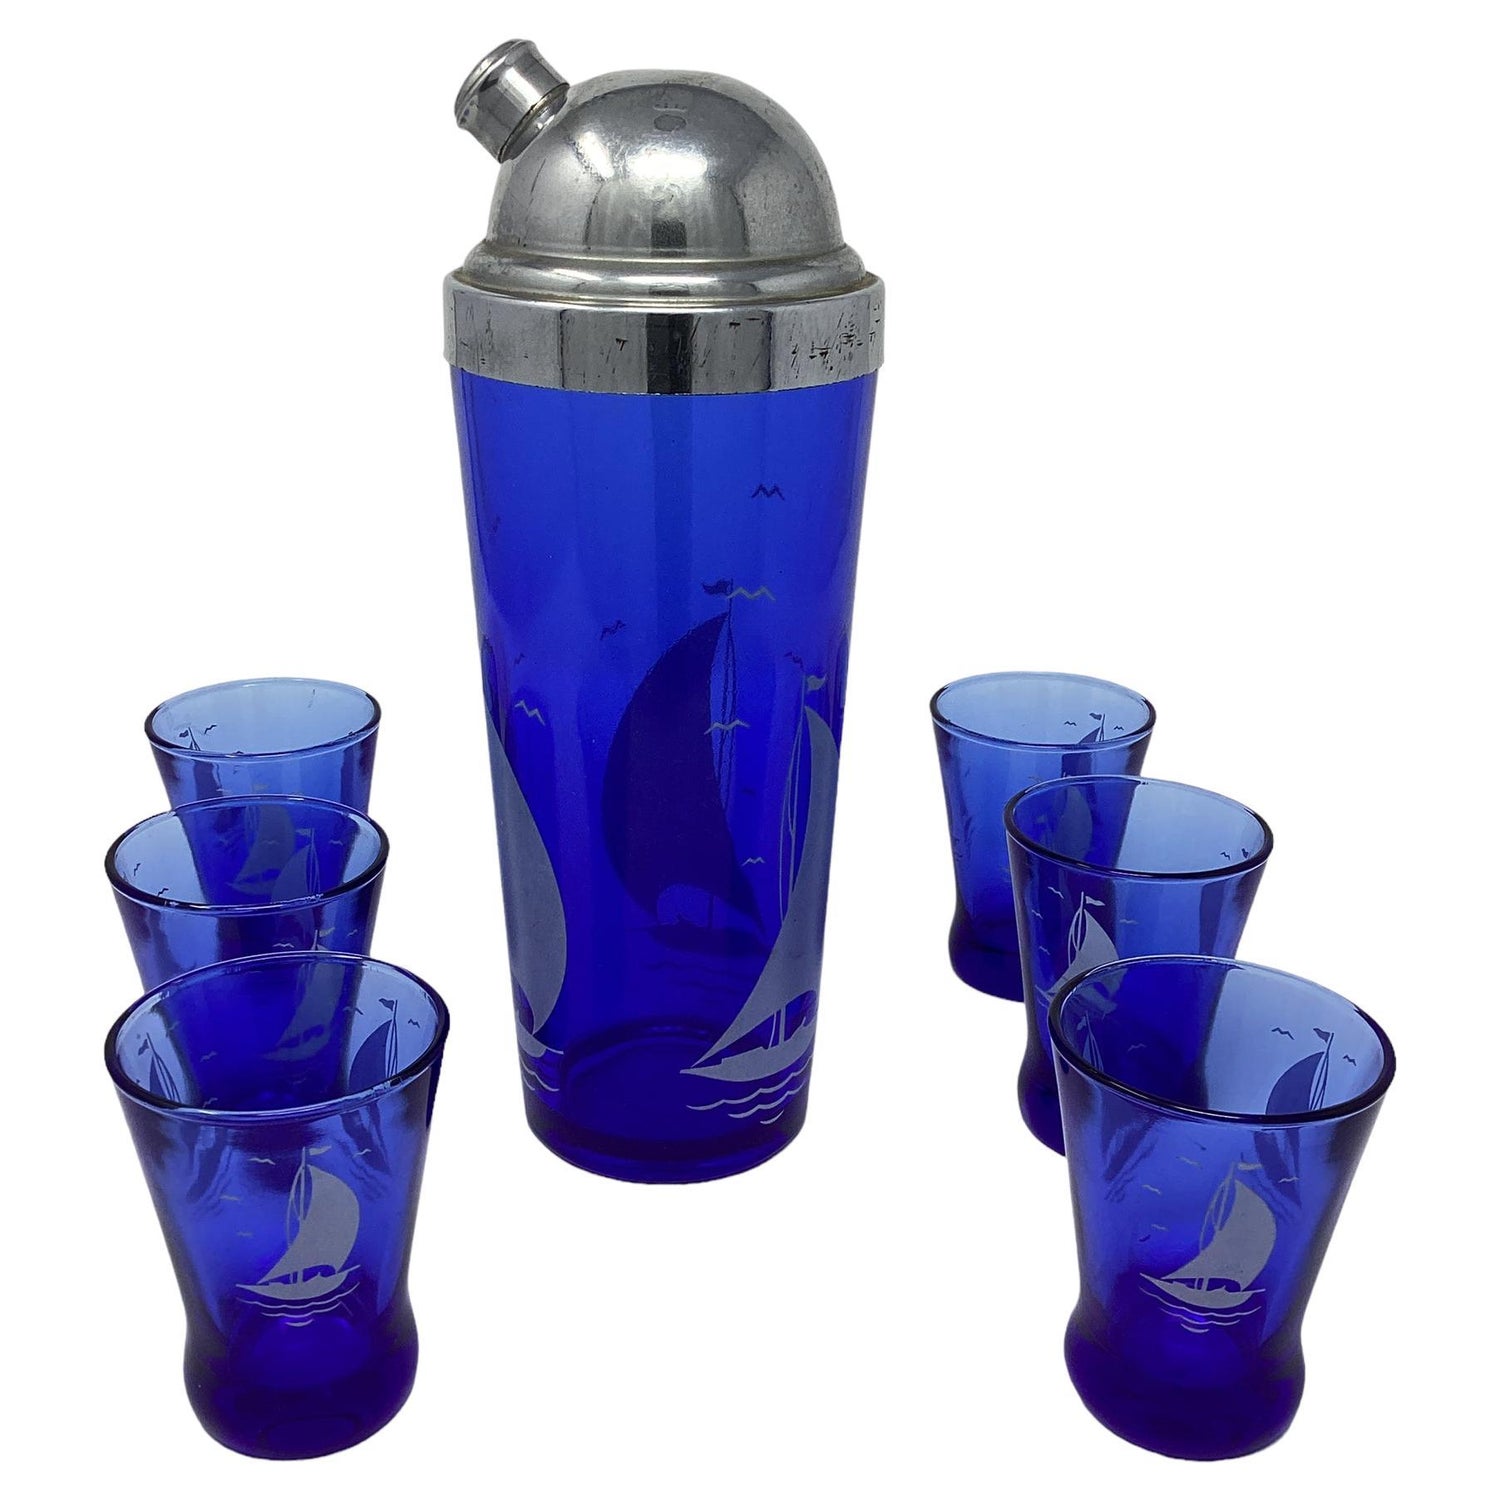 Cobalt Blue Ridged Glass Cocktail Martini Shaker with 4 Matching